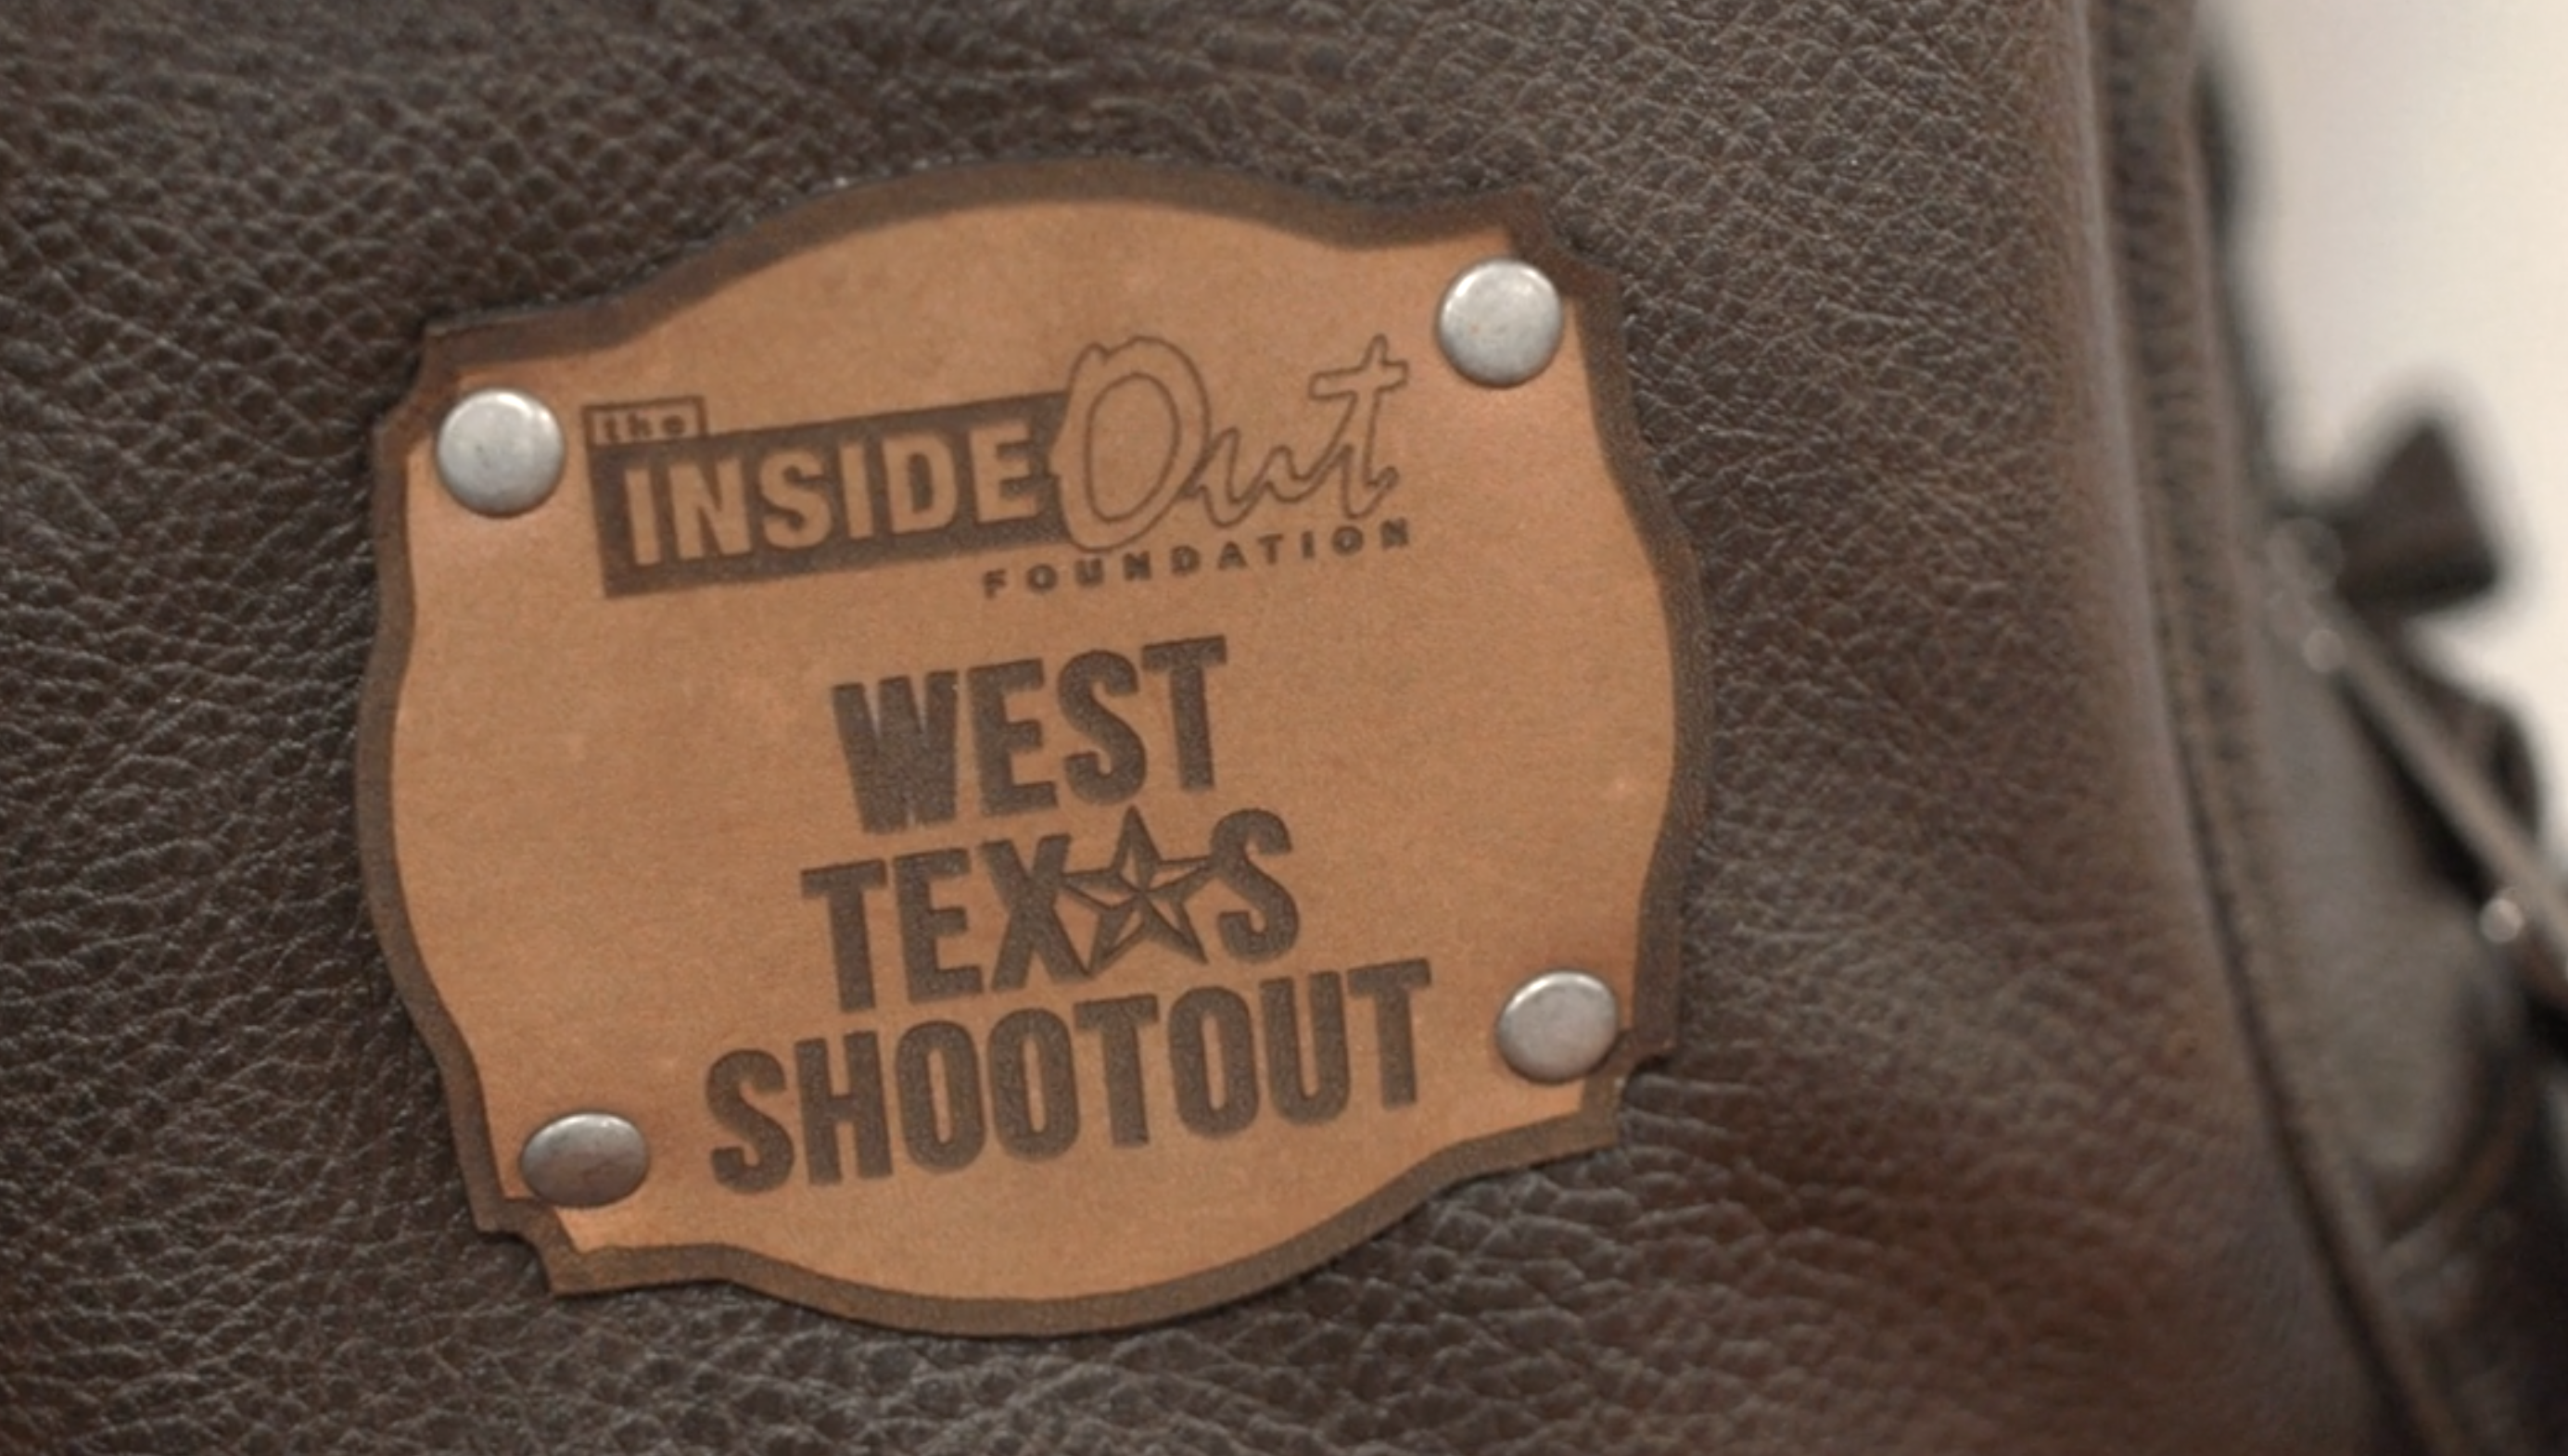 The West Texas Shootout leather patch for the inside out foundation